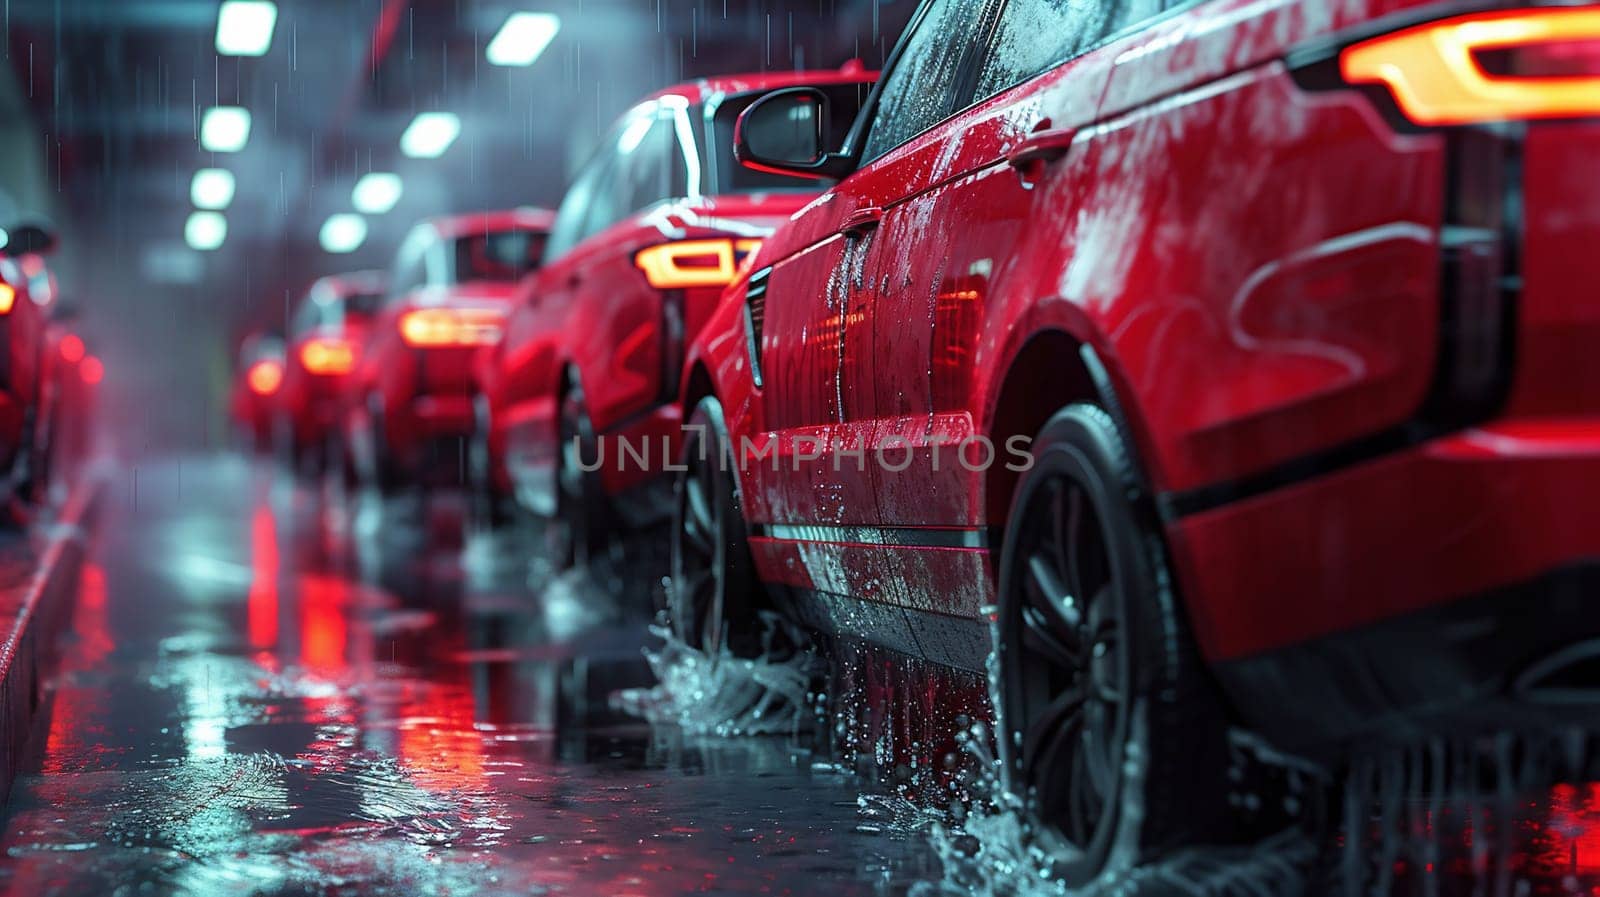 Hard rain fall at night with blurry cars as background. by Andelov13